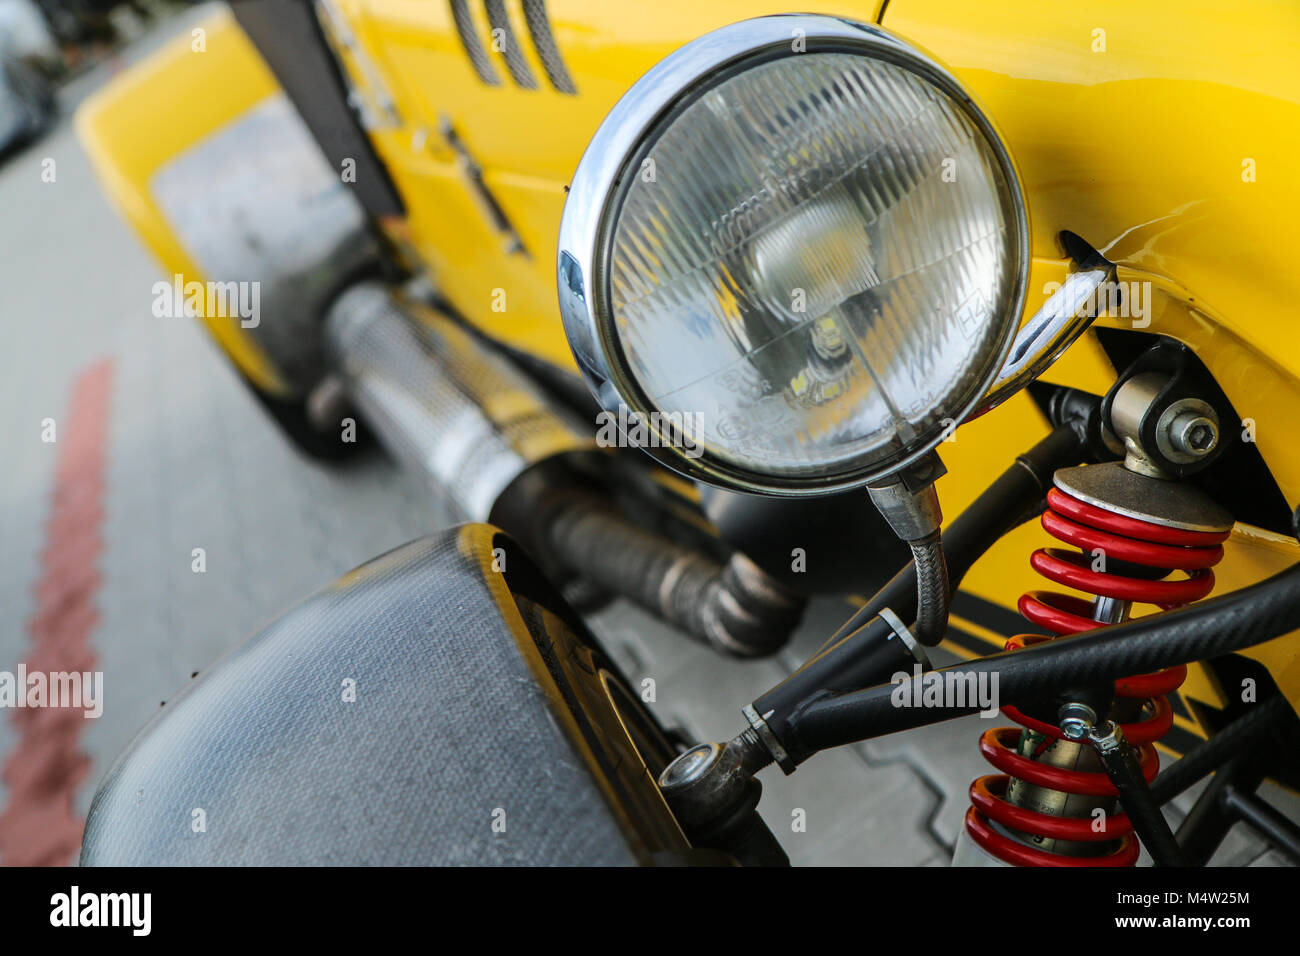 A detail of a light sport car´s headlight and suspension. The bodywork is visible with the side exhaust. Stock Photo